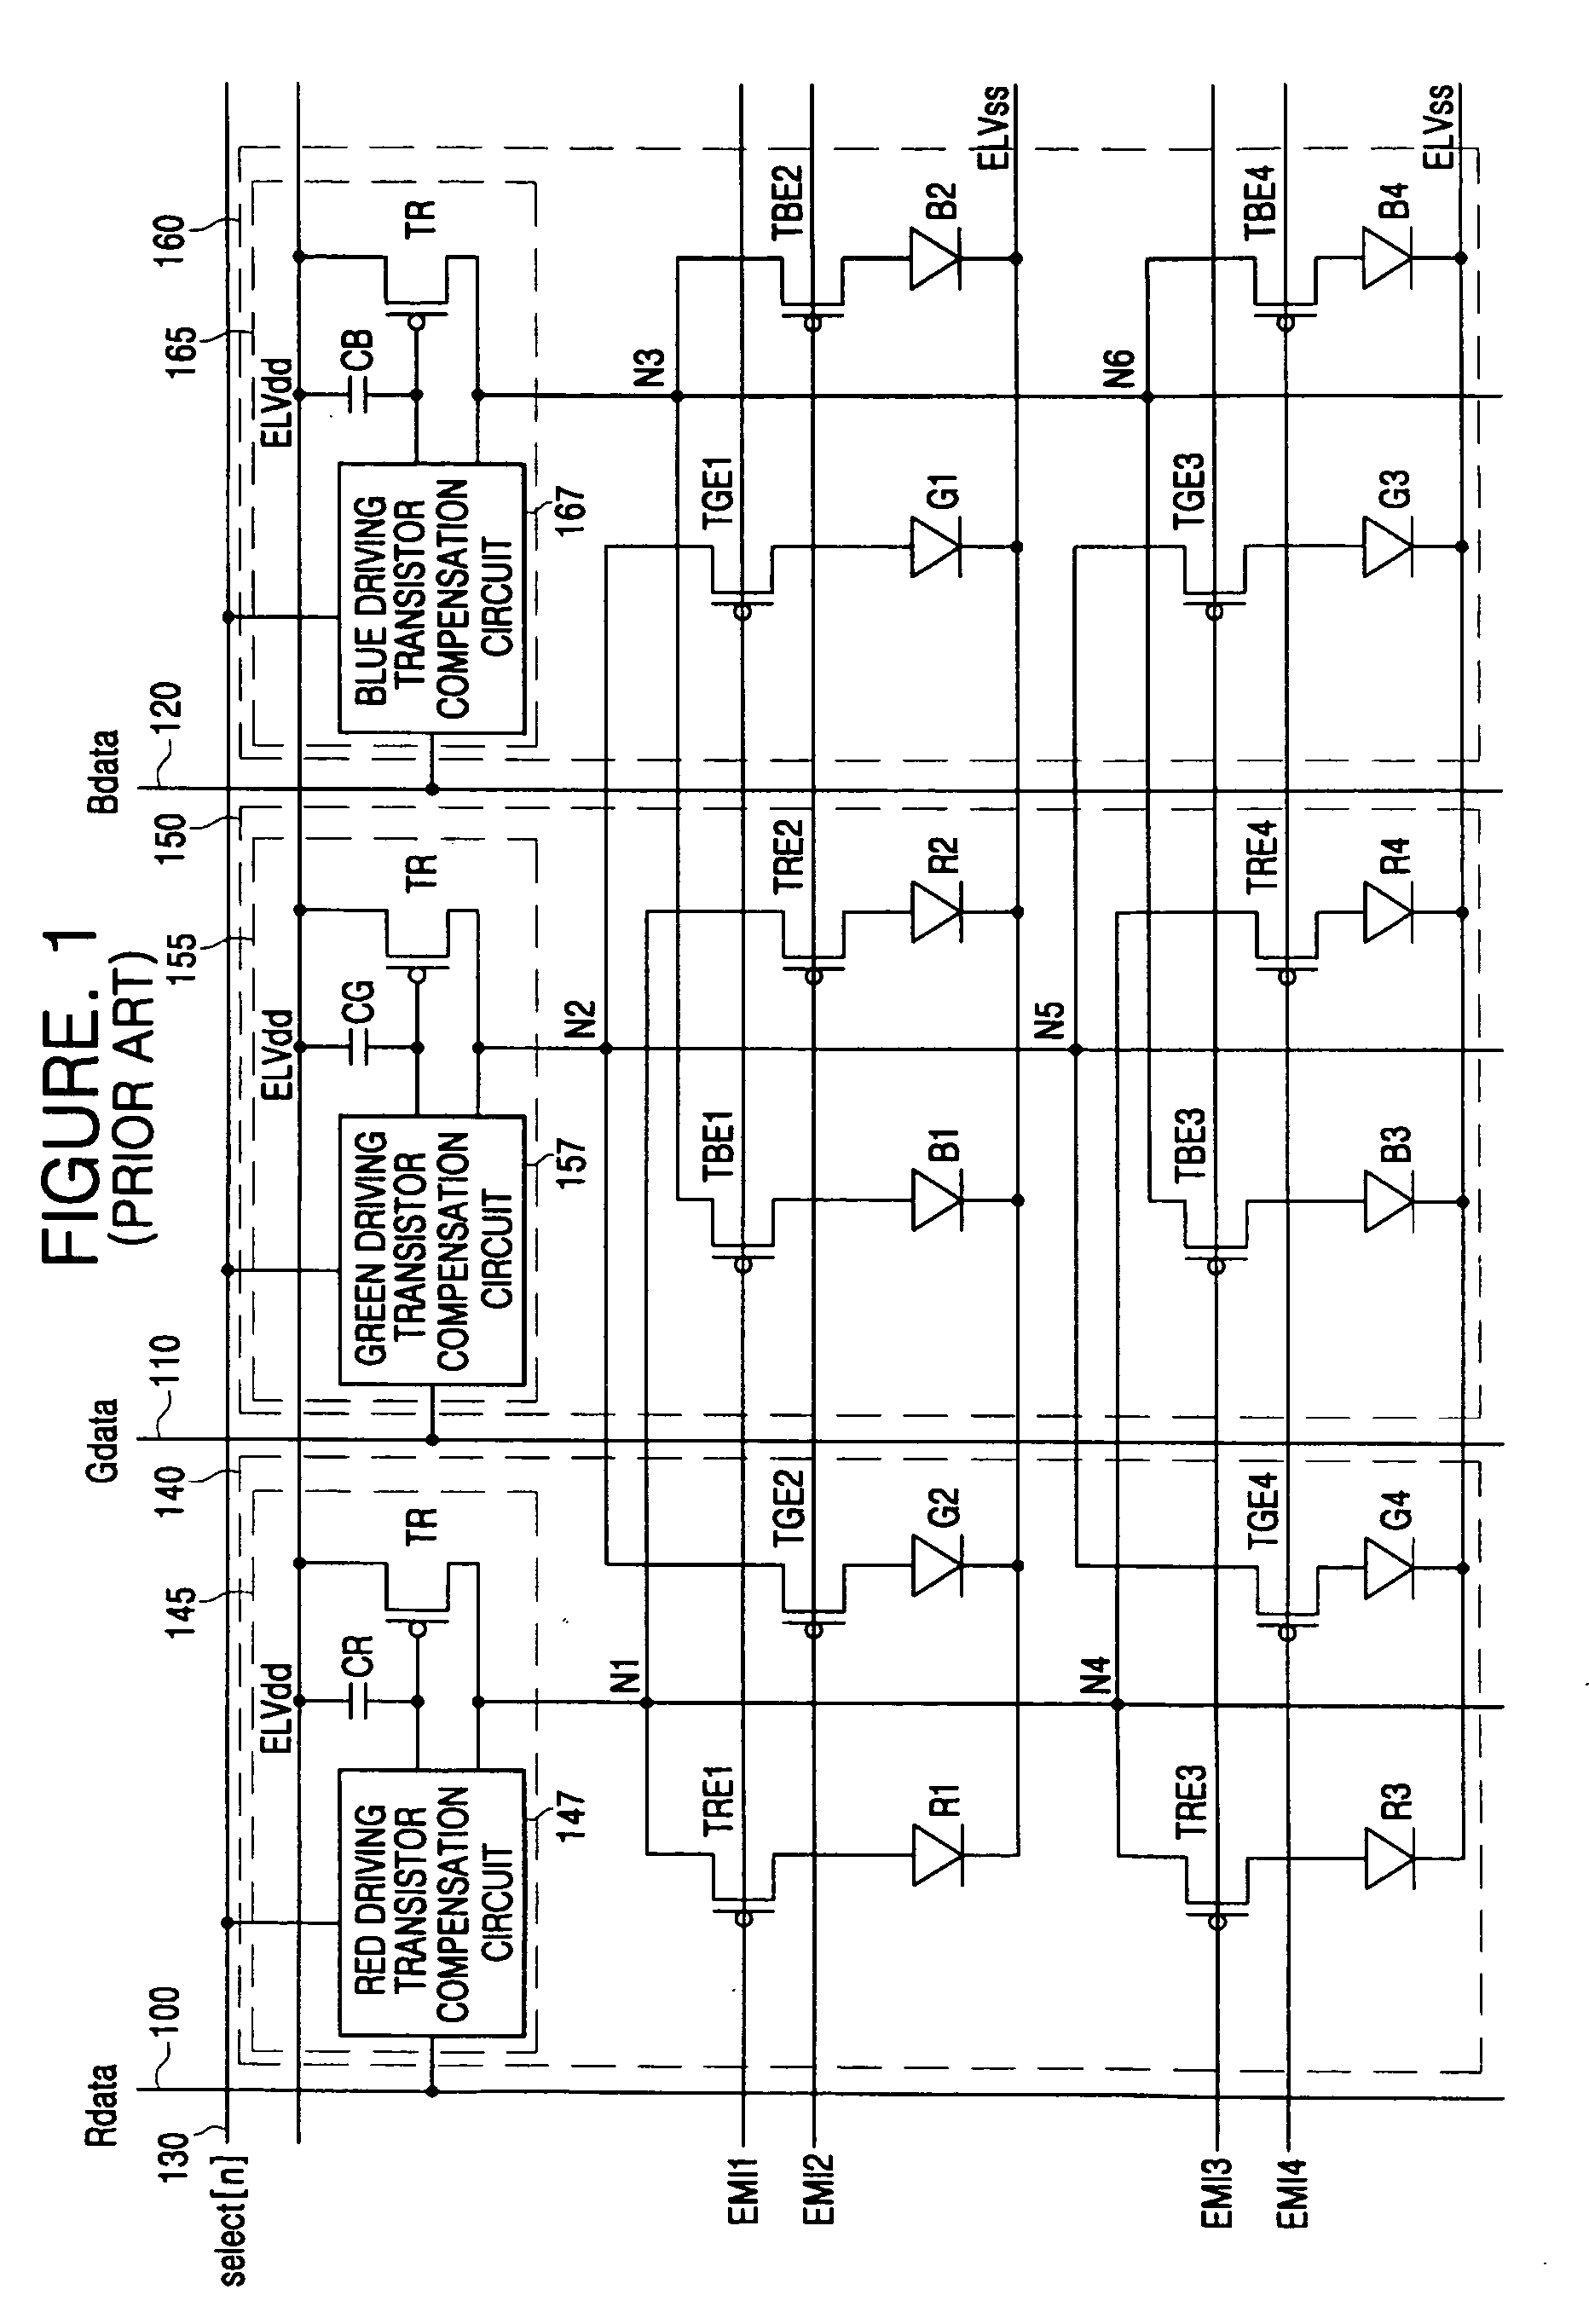 Time-divisional driving organic electroluminescence display